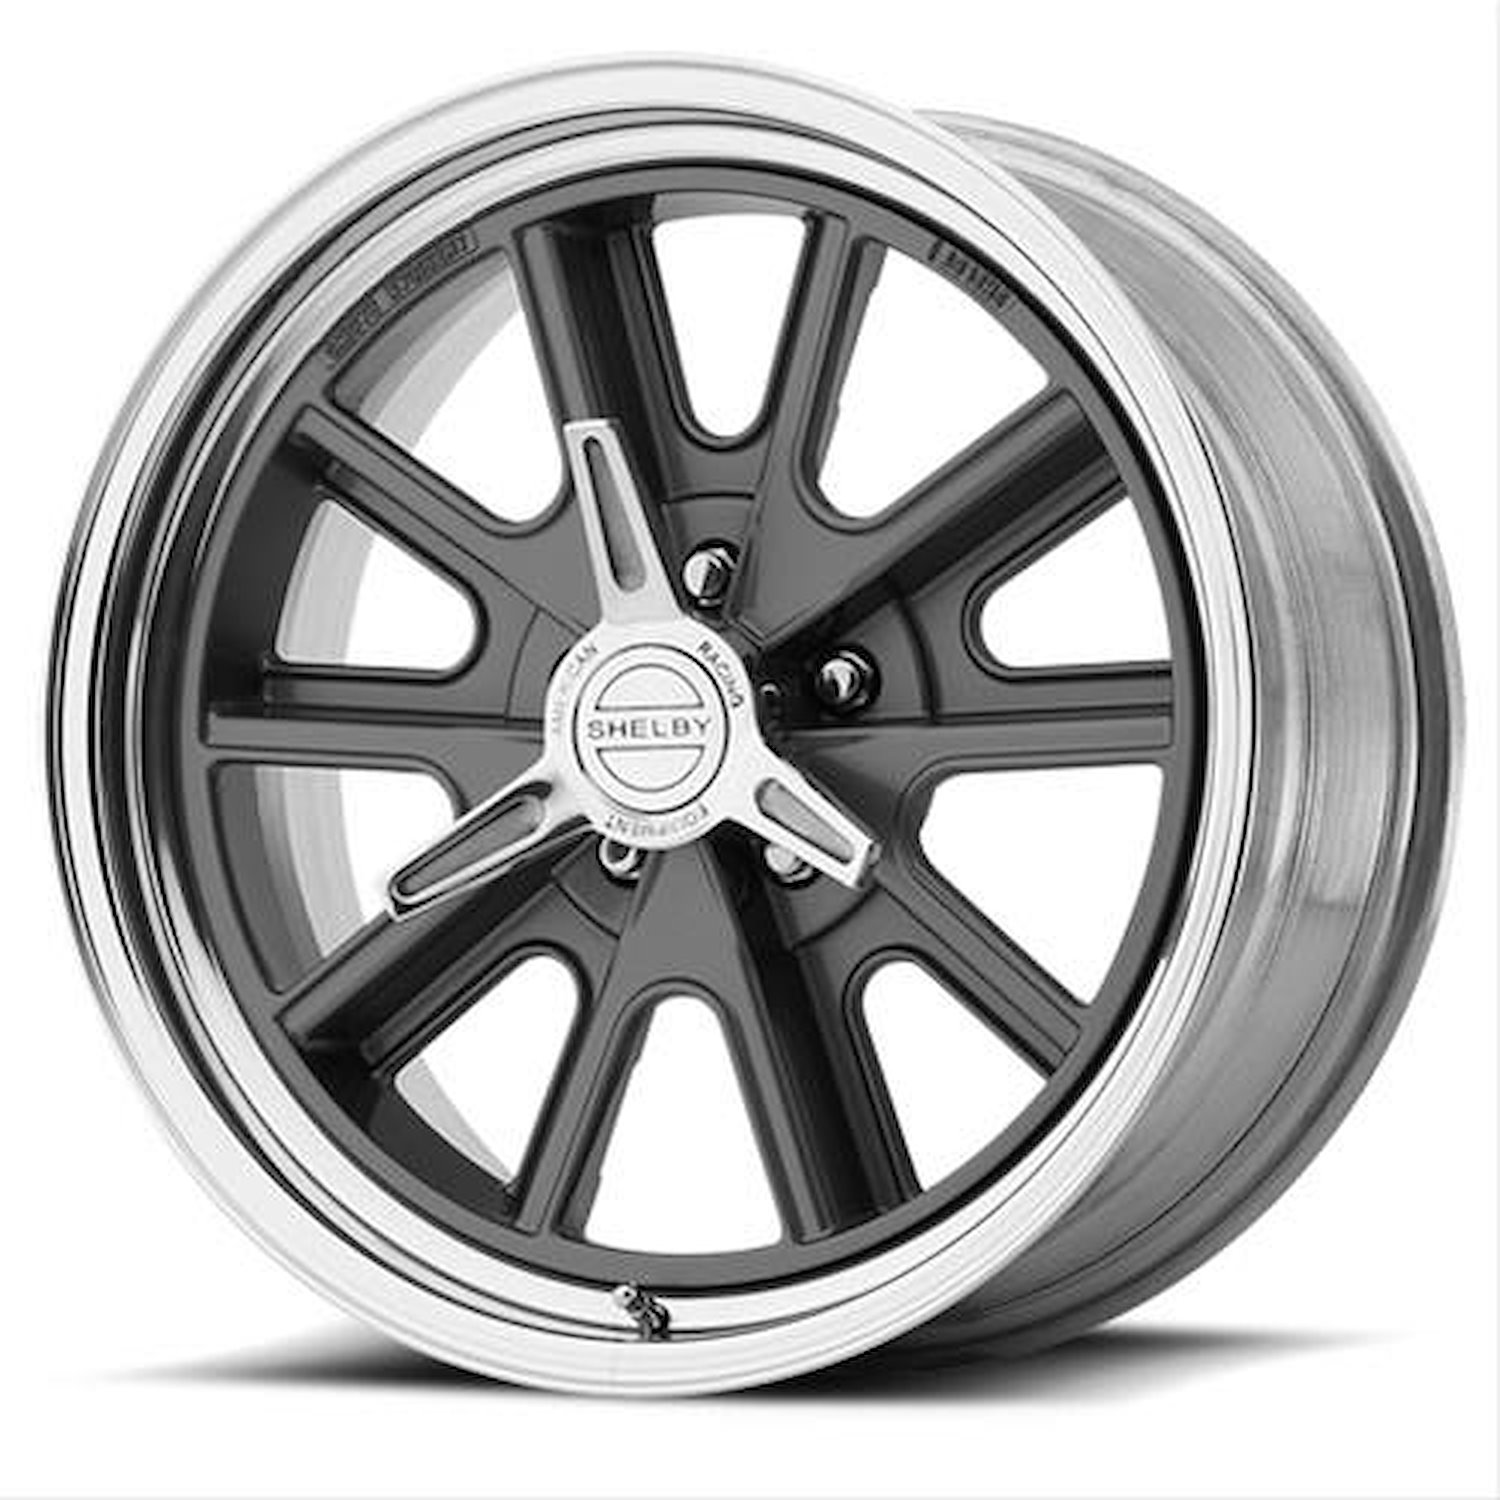 AMERICAN RACING 427 SHELBY COBRA TWO-PIECE MAG GRAY CENTER POLISHED BARREL 17 x 9.5 5X4.75 -6 5.01